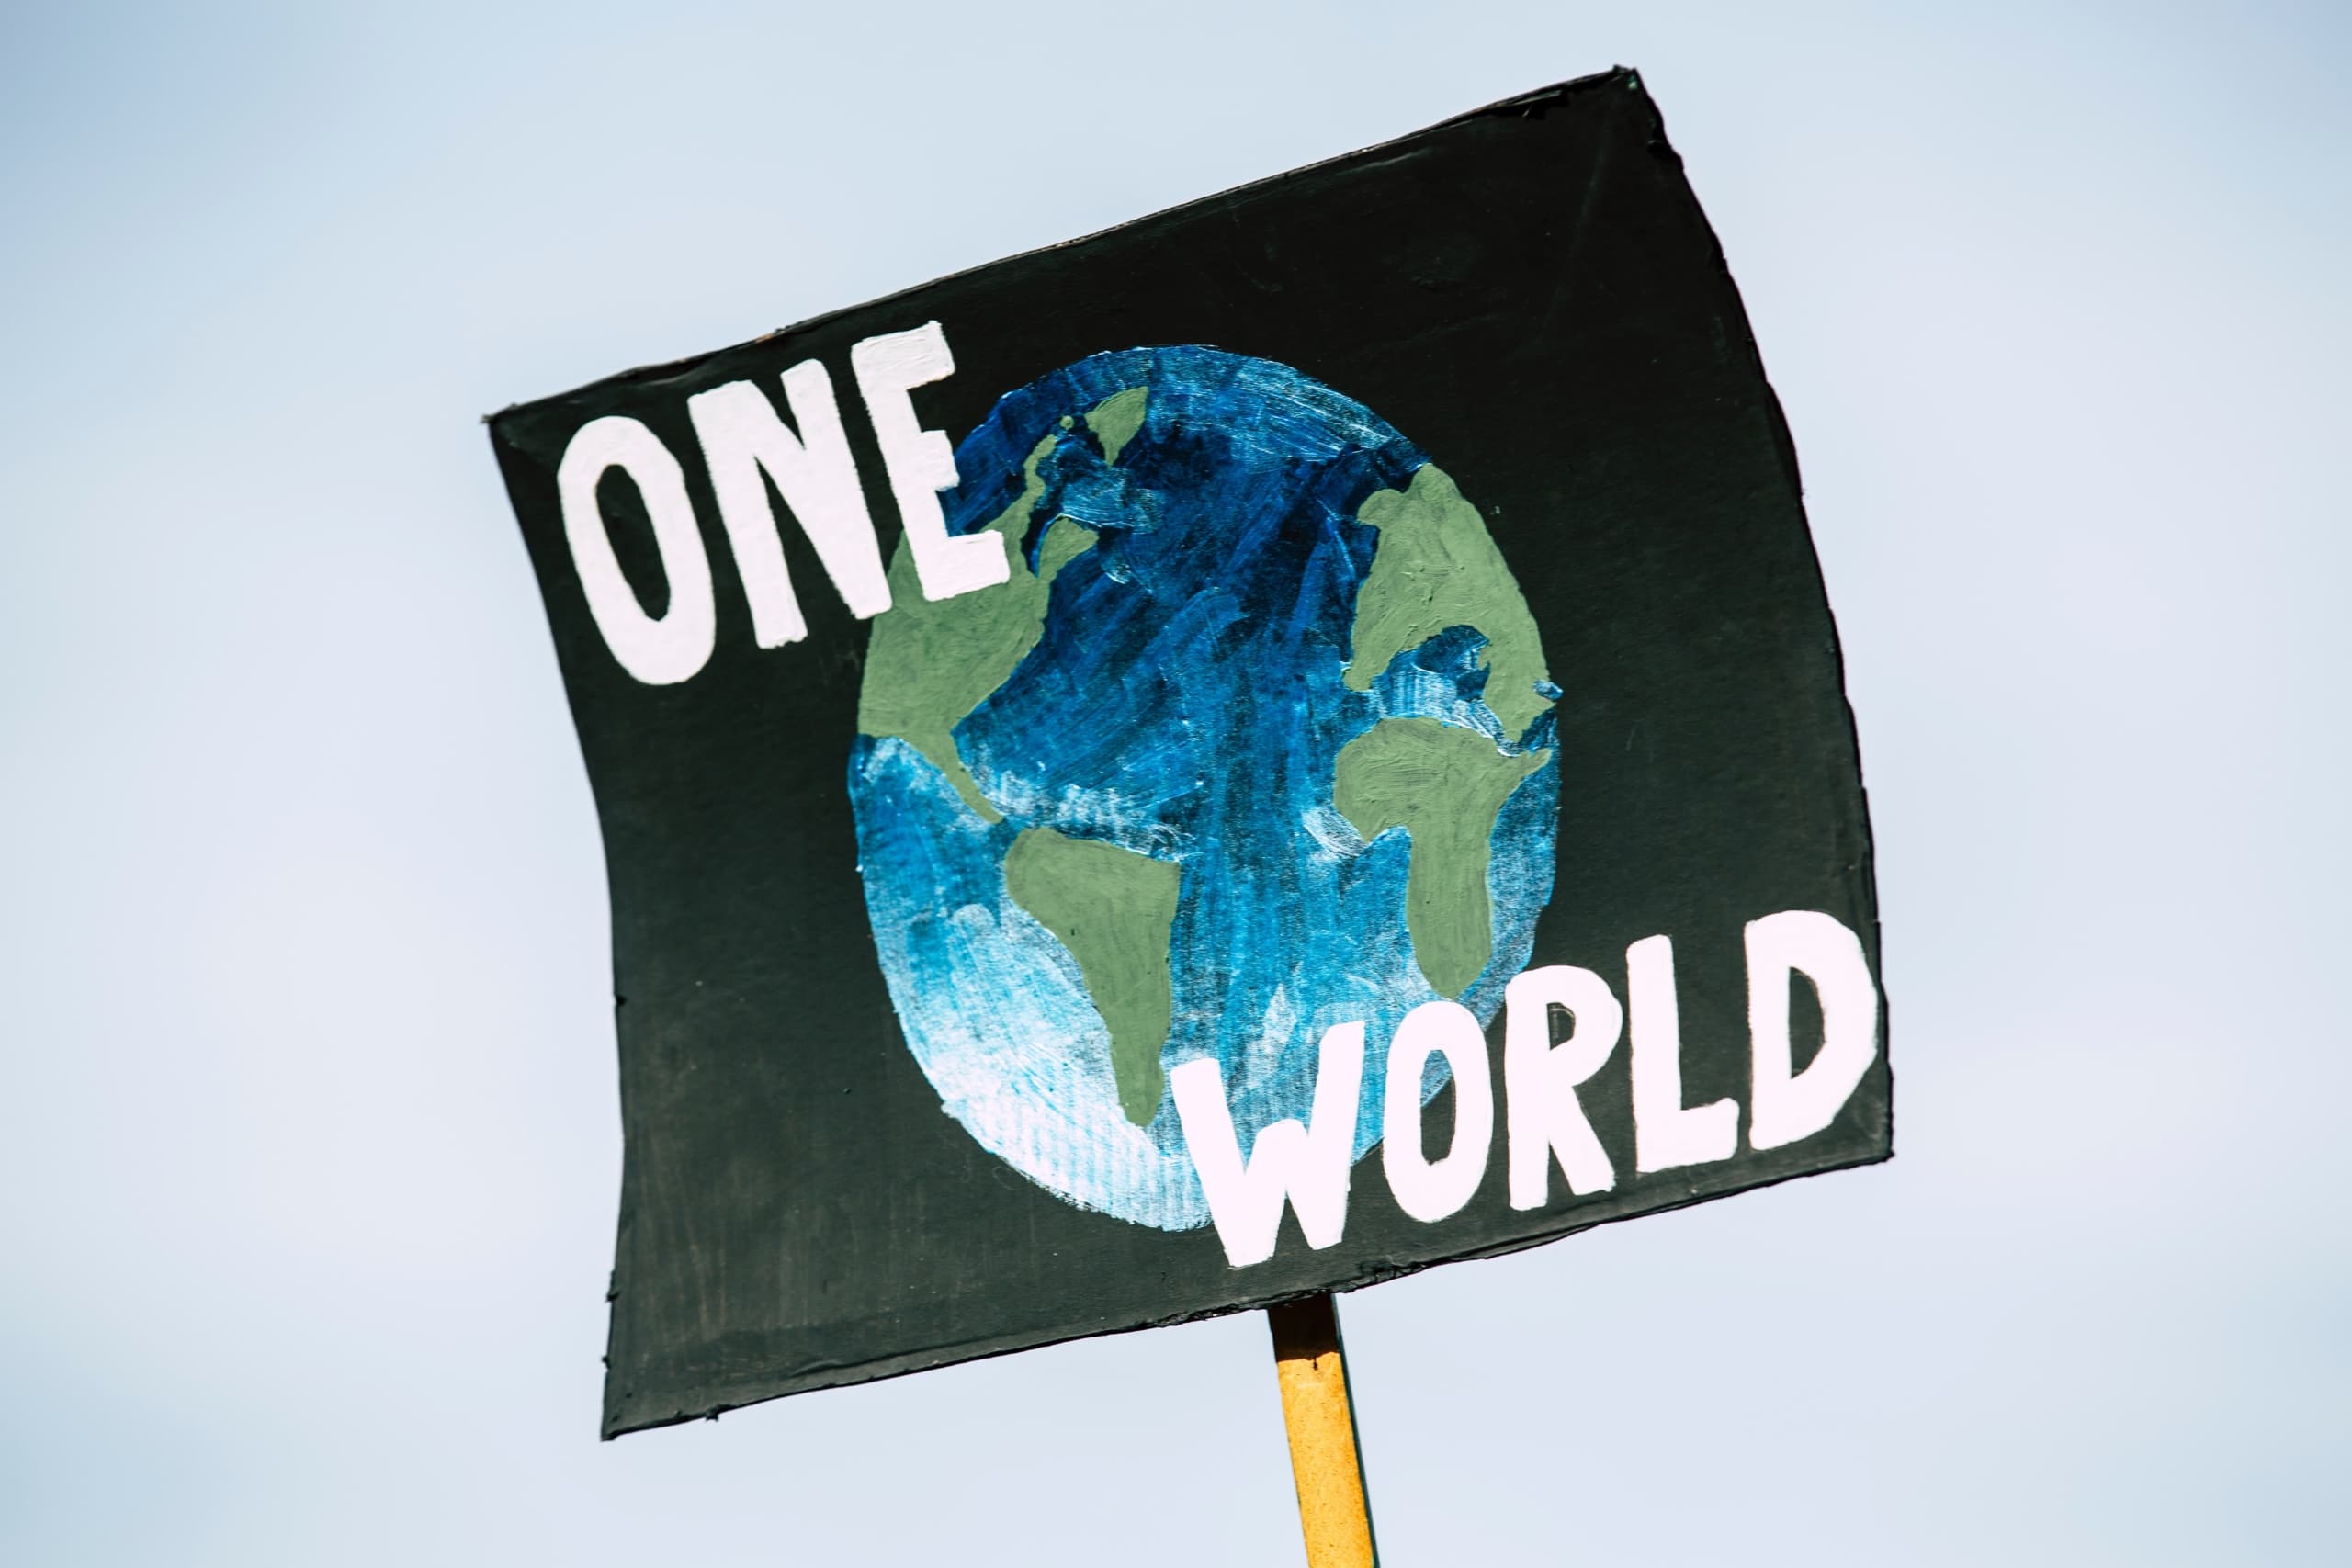 A sign with the words "One World" against an illustration of the Earth against a black background.